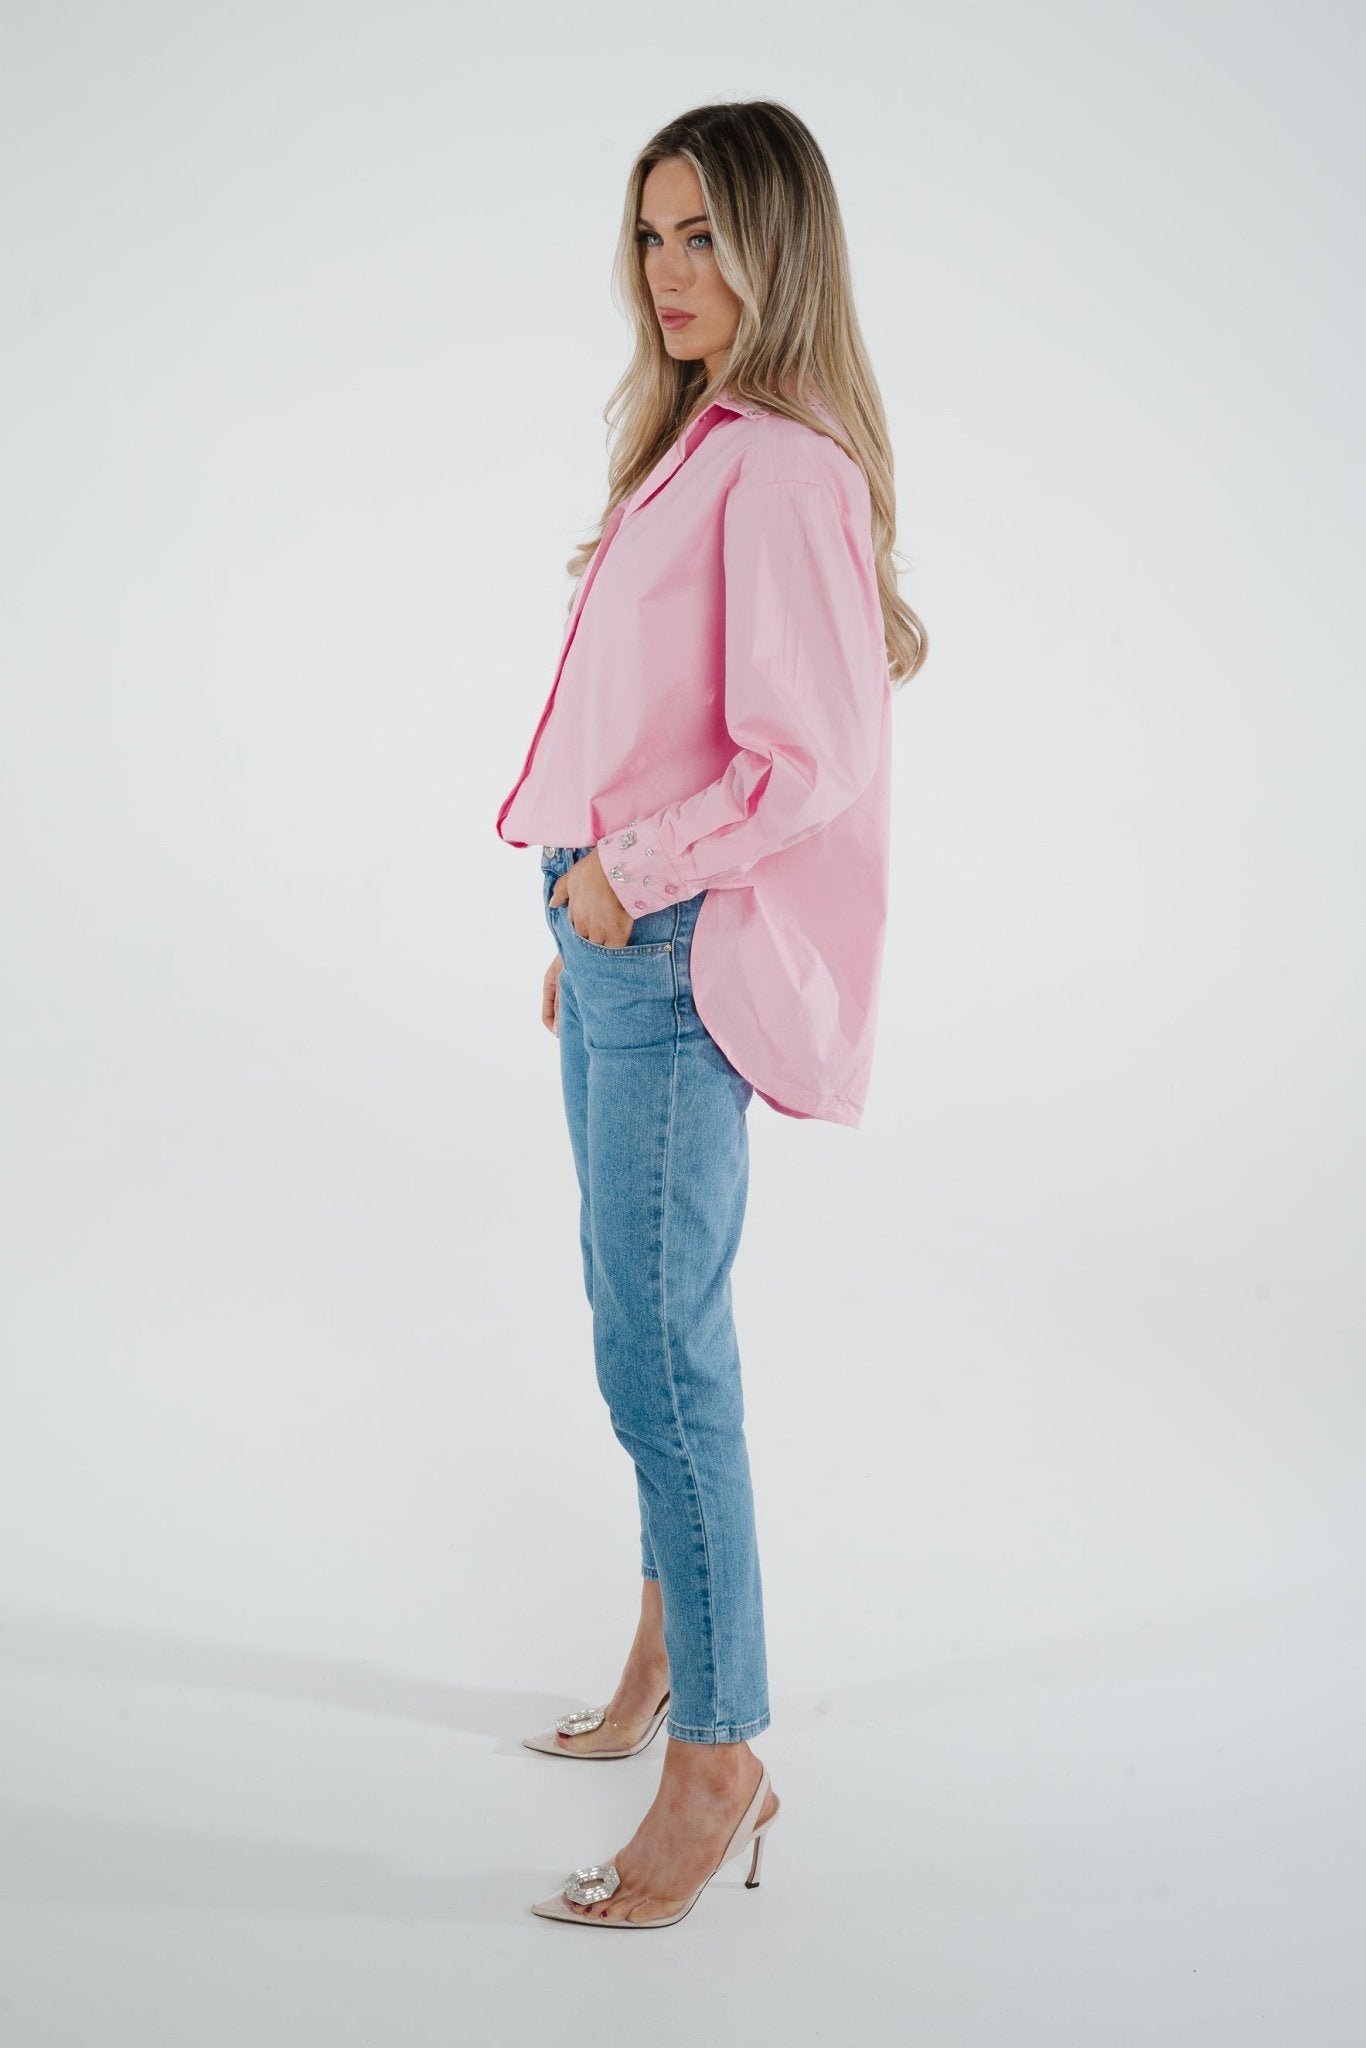 Holly Embellished Shirt In Pink - The Walk in Wardrobe